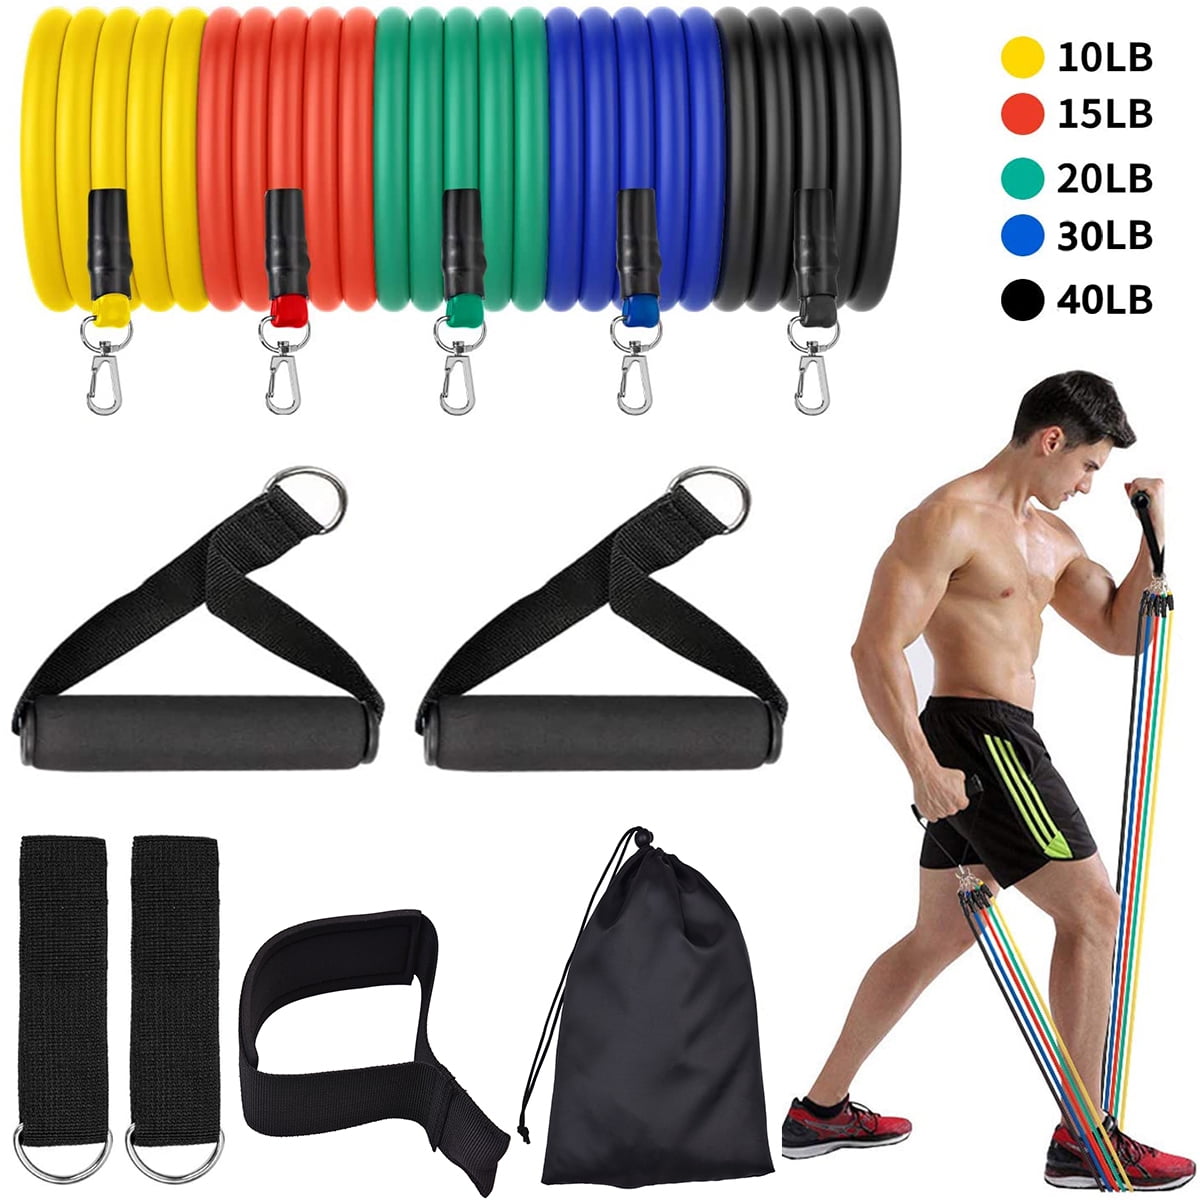 INNSTAR Resistance Bands Set Stackable Up to 210lb Ankle Strap Carry Bag & Manual for Workouts Training Yoga Handles 5 Levels Exercise Bands with Protective Sleeves Door Anchor